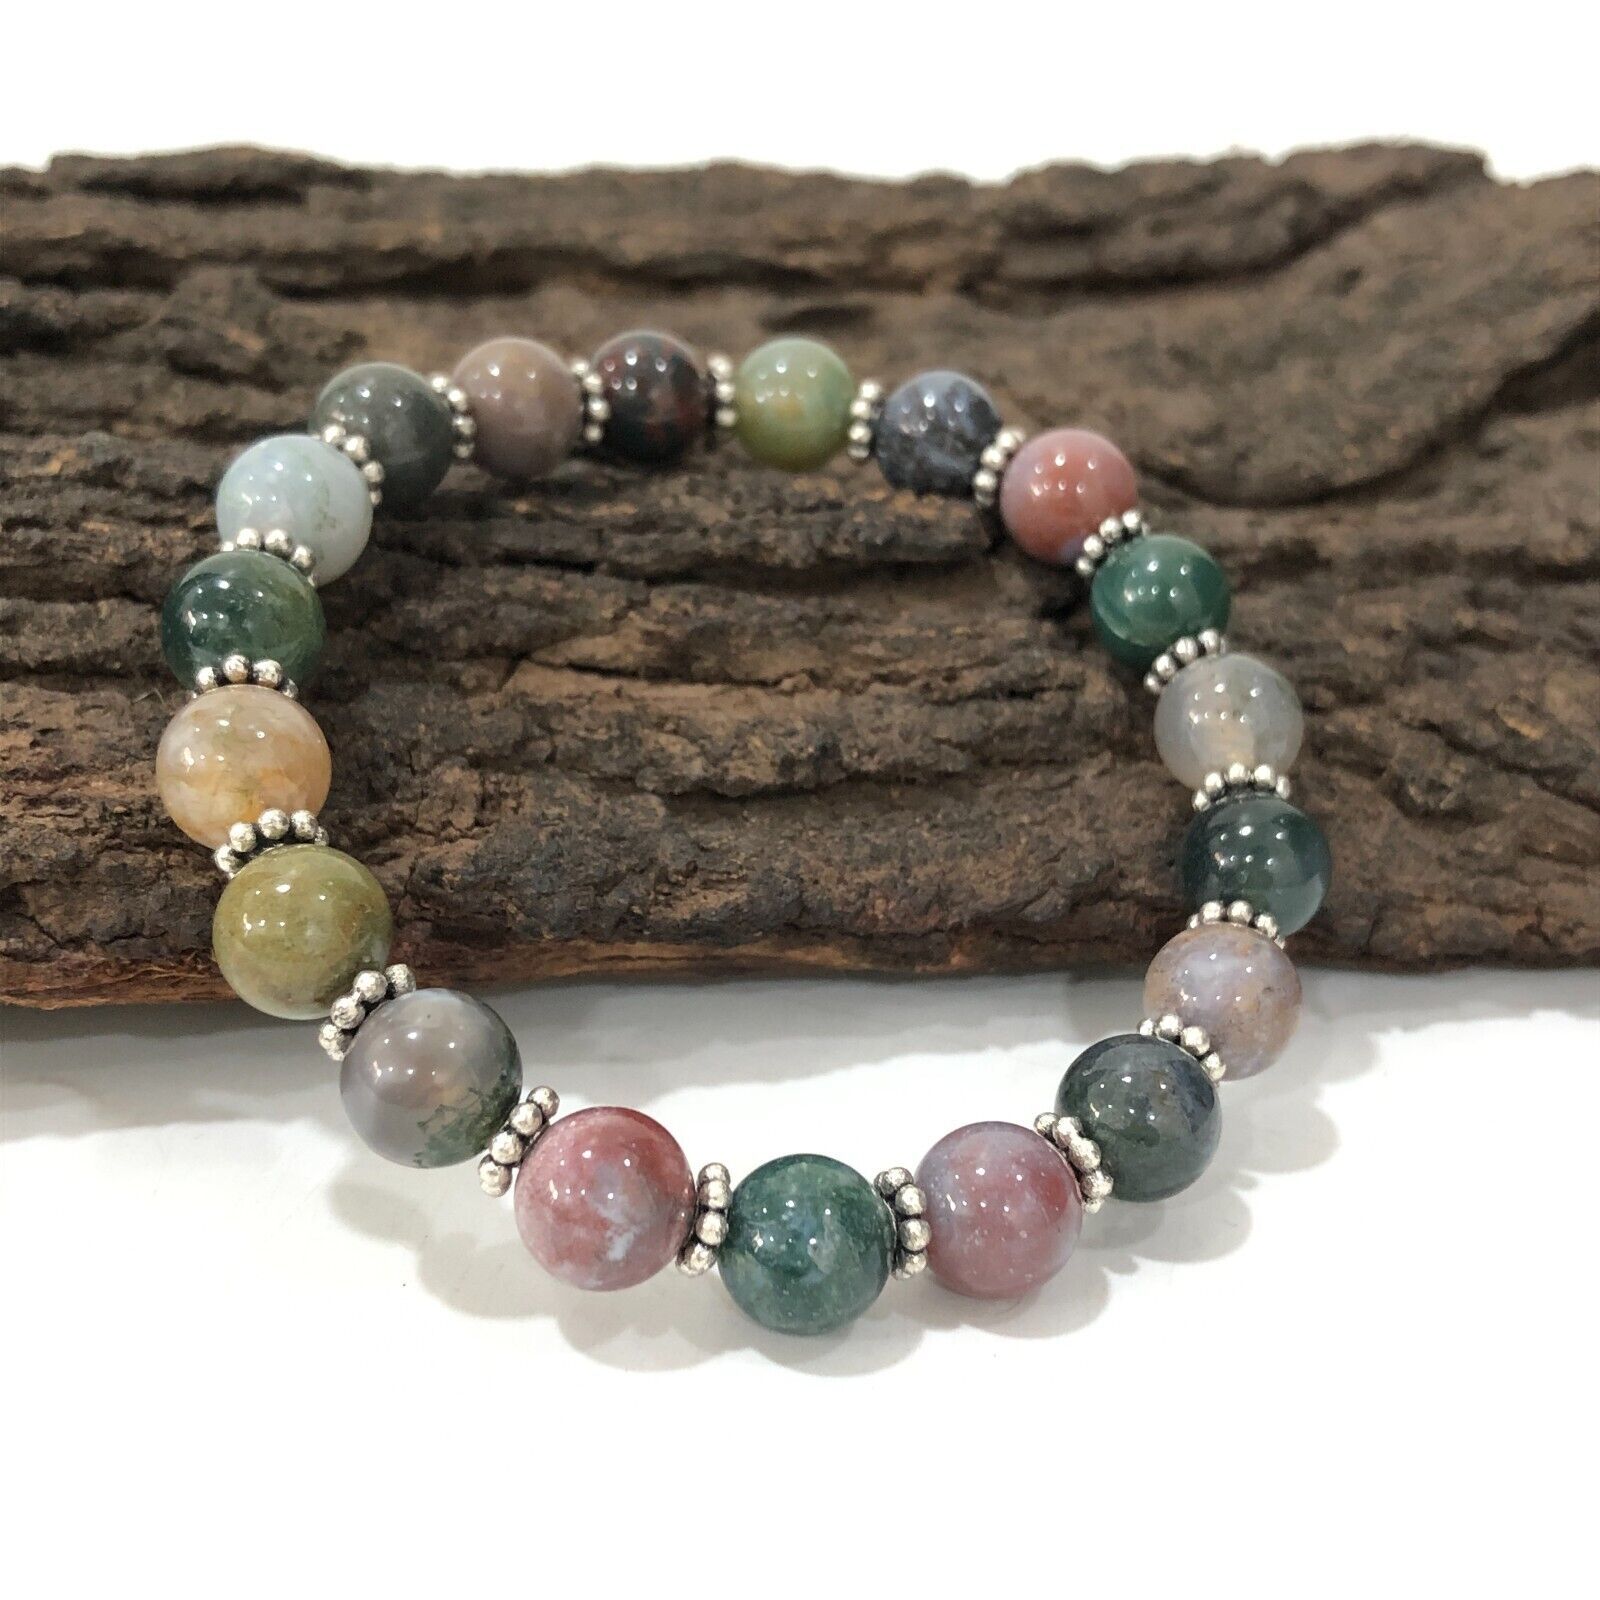 Indian Agate Gemstone 8 mm Beads Stretch with Chakra Bracelet CSB-50 - $10.92